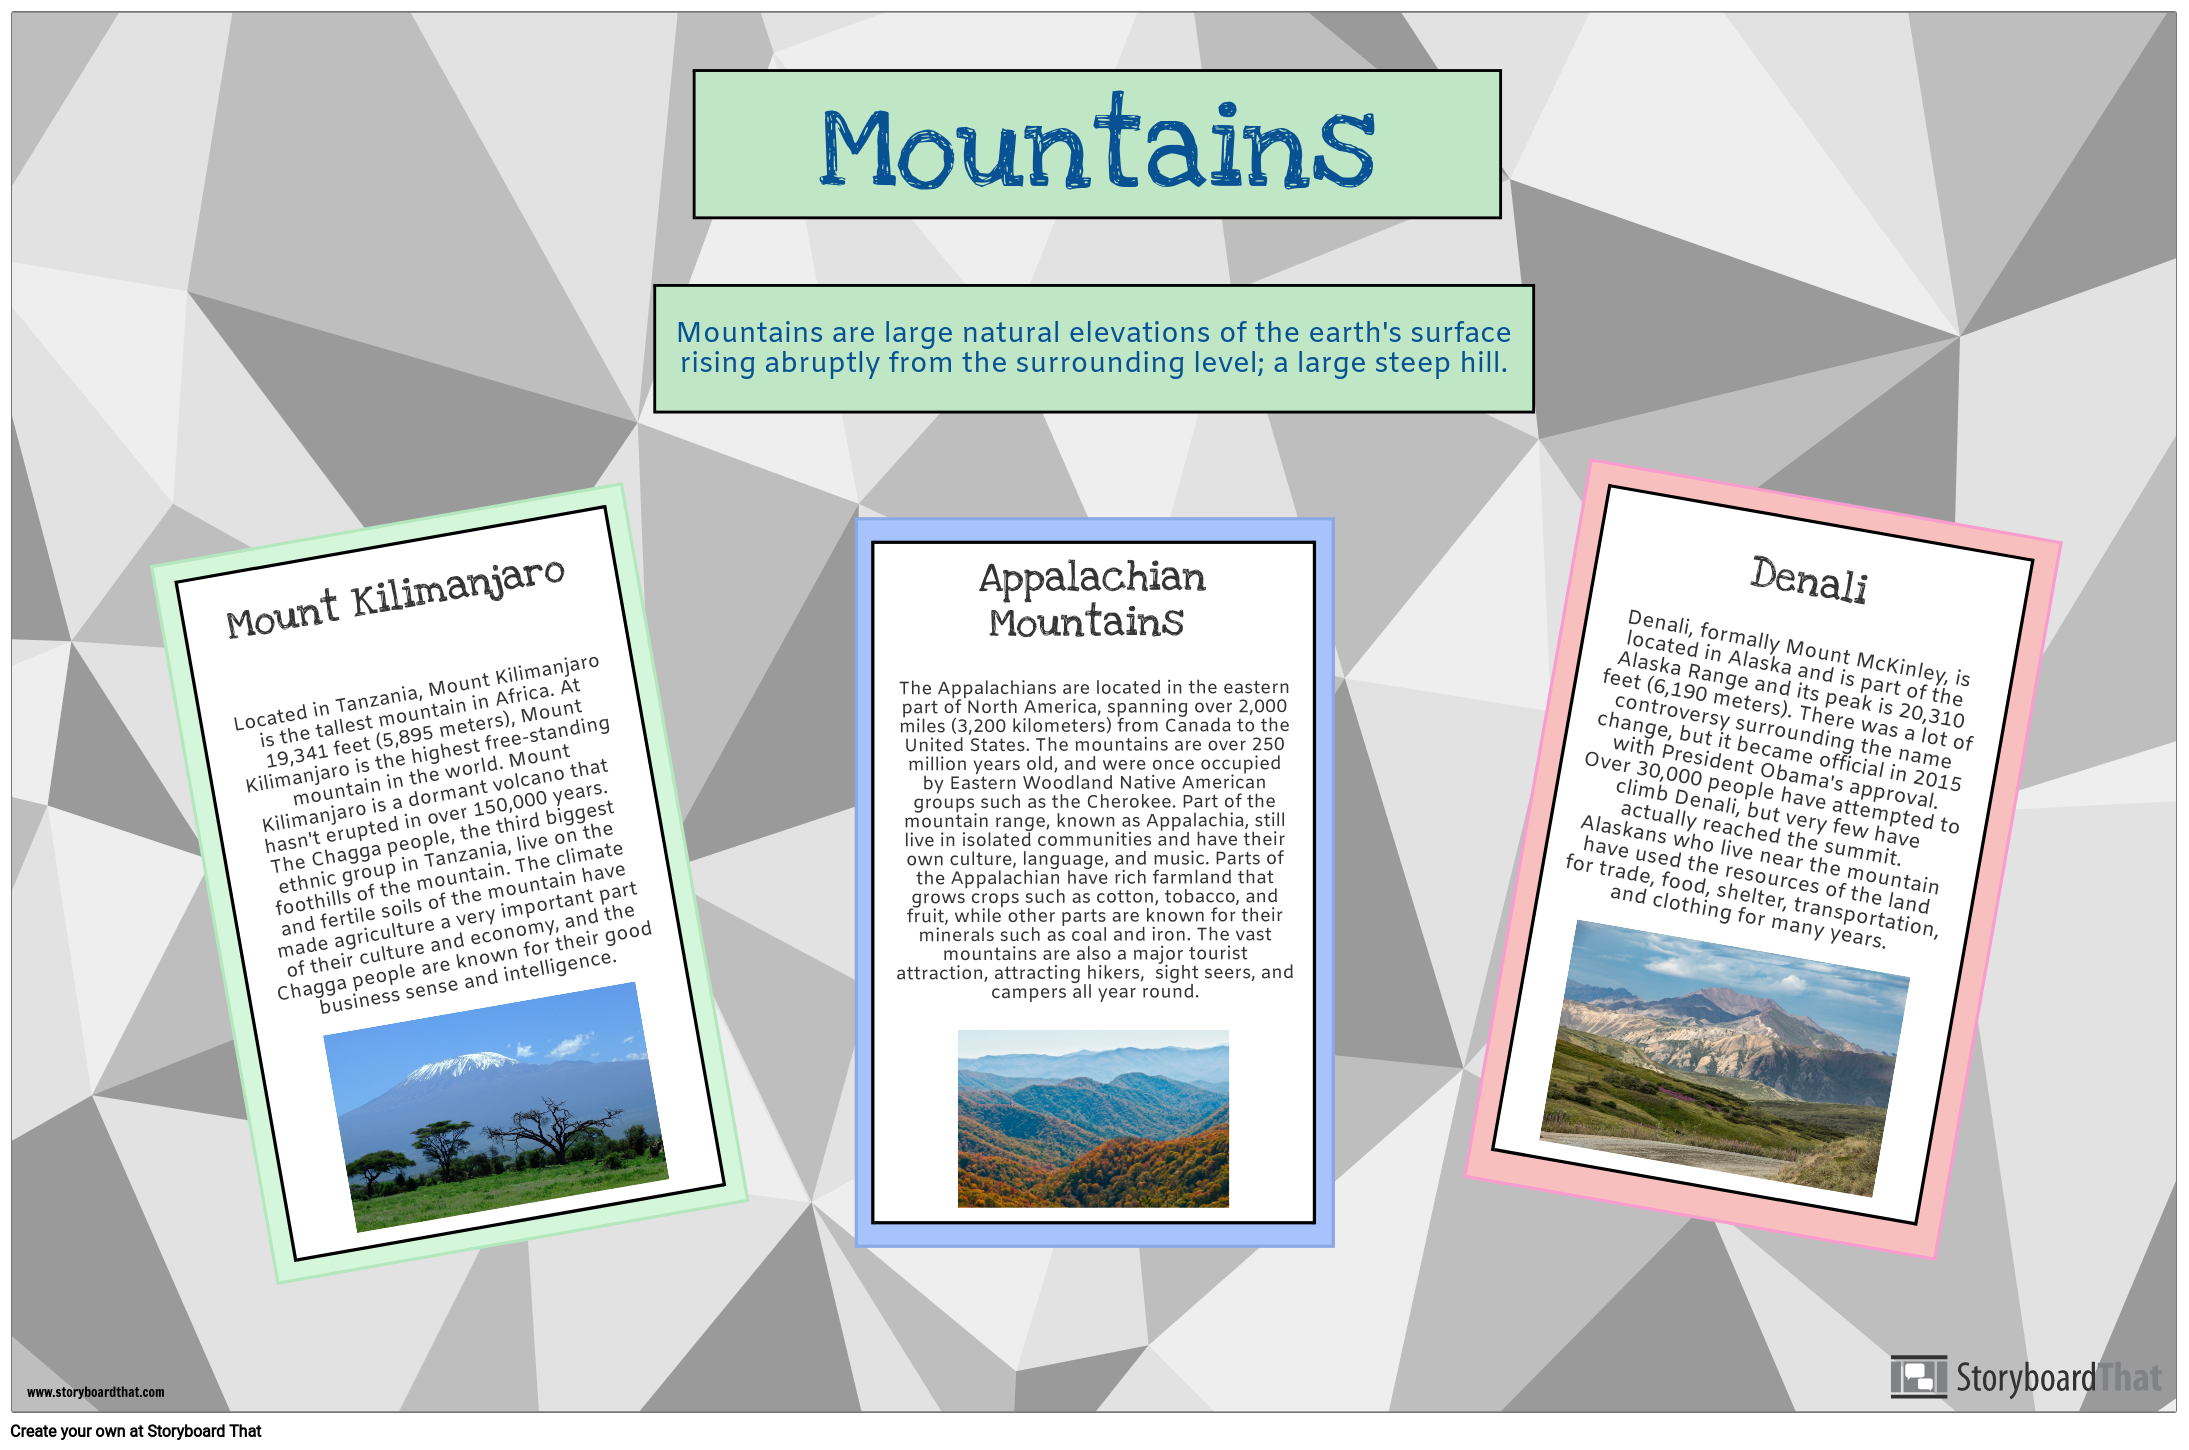 Research Poster of Important Landforms